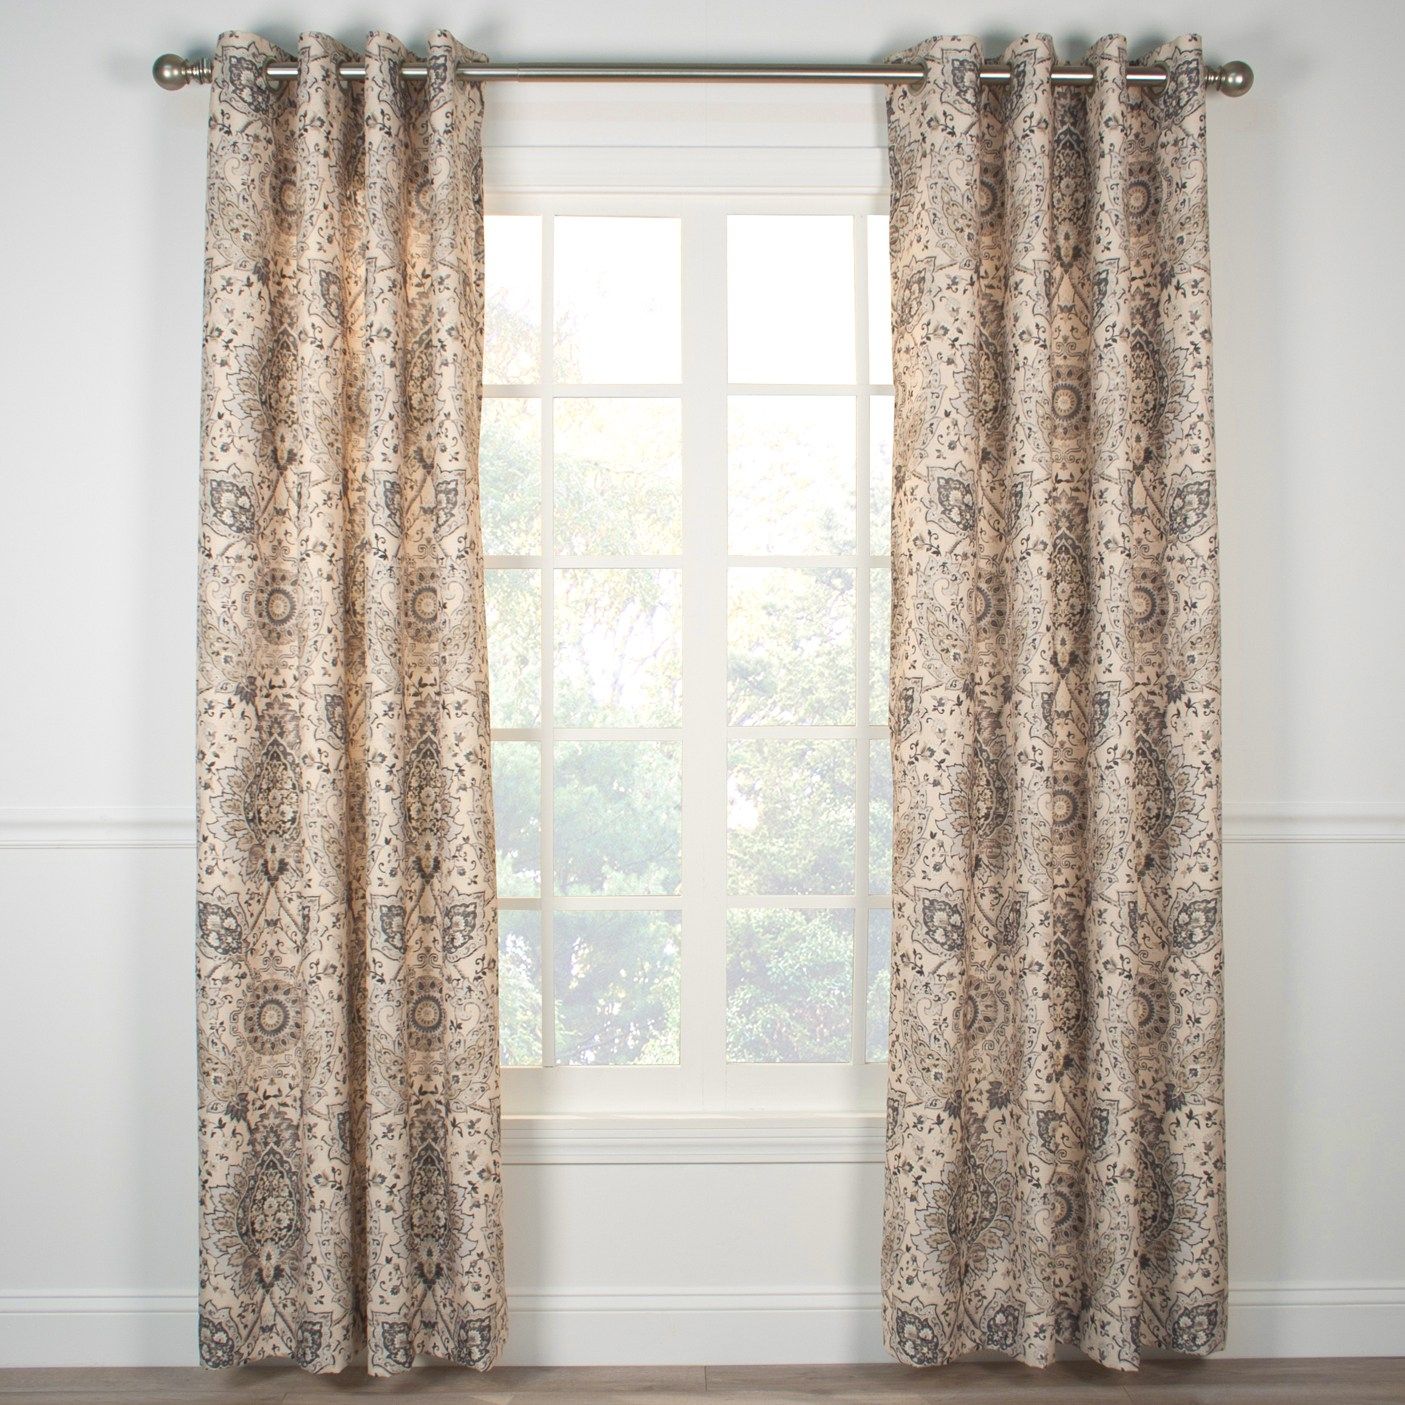 54 Inch Long Curtain Panels Throughout 54 Inch Long Curtain Panels (Photo 2 of 25)